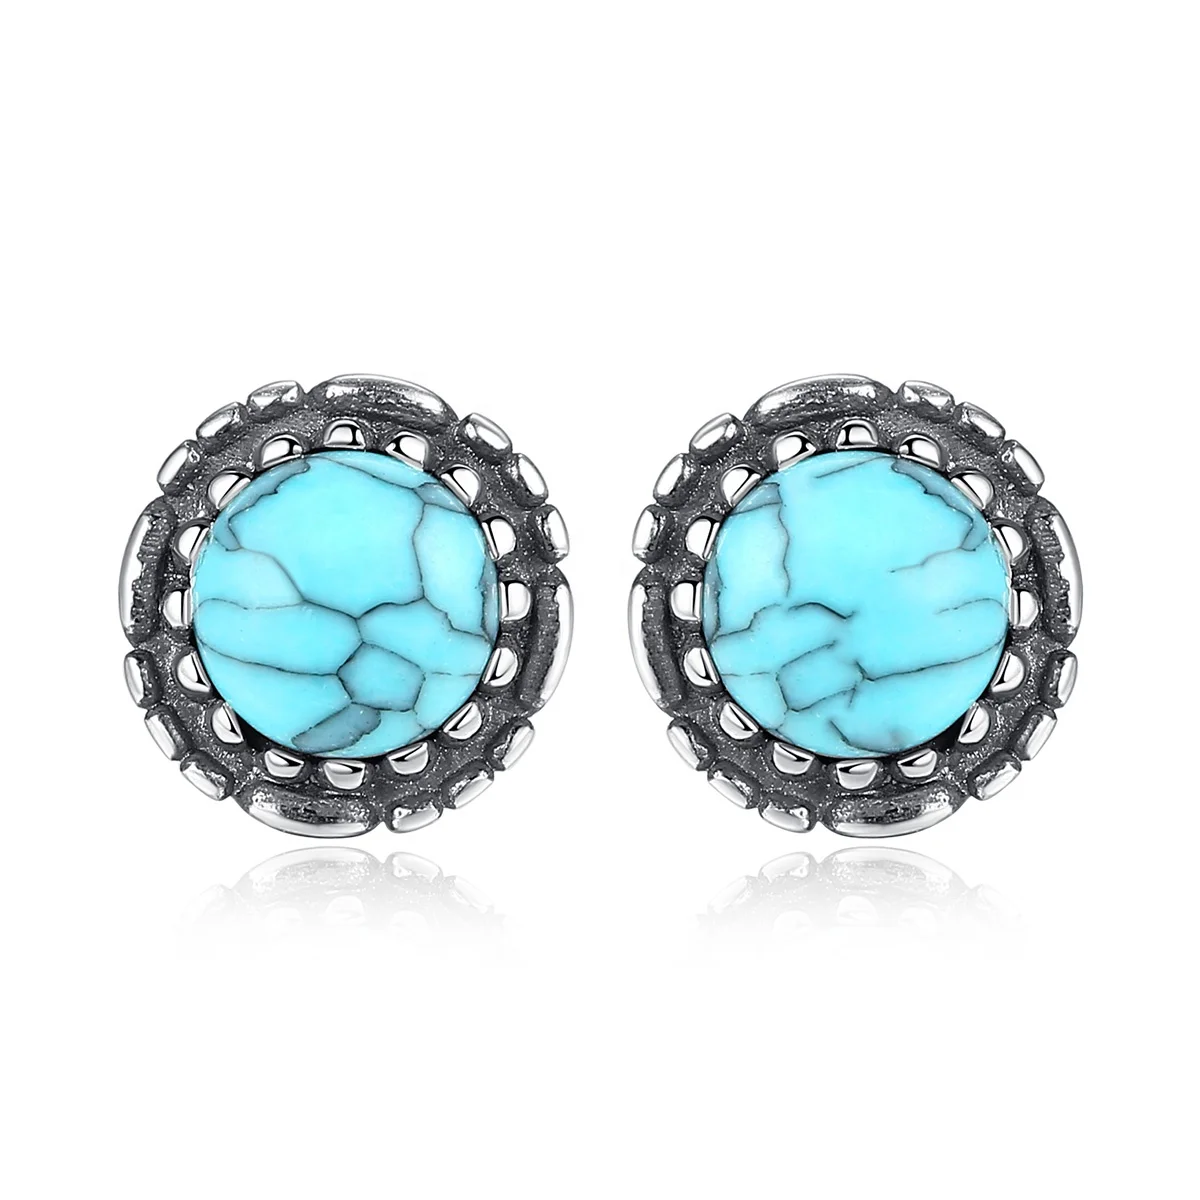 

CZCITY Genuine 925 Sterling Silver Fashion Earring Round Turquoise Stud Woman Vintage Original Thai Silver Statement Earrings